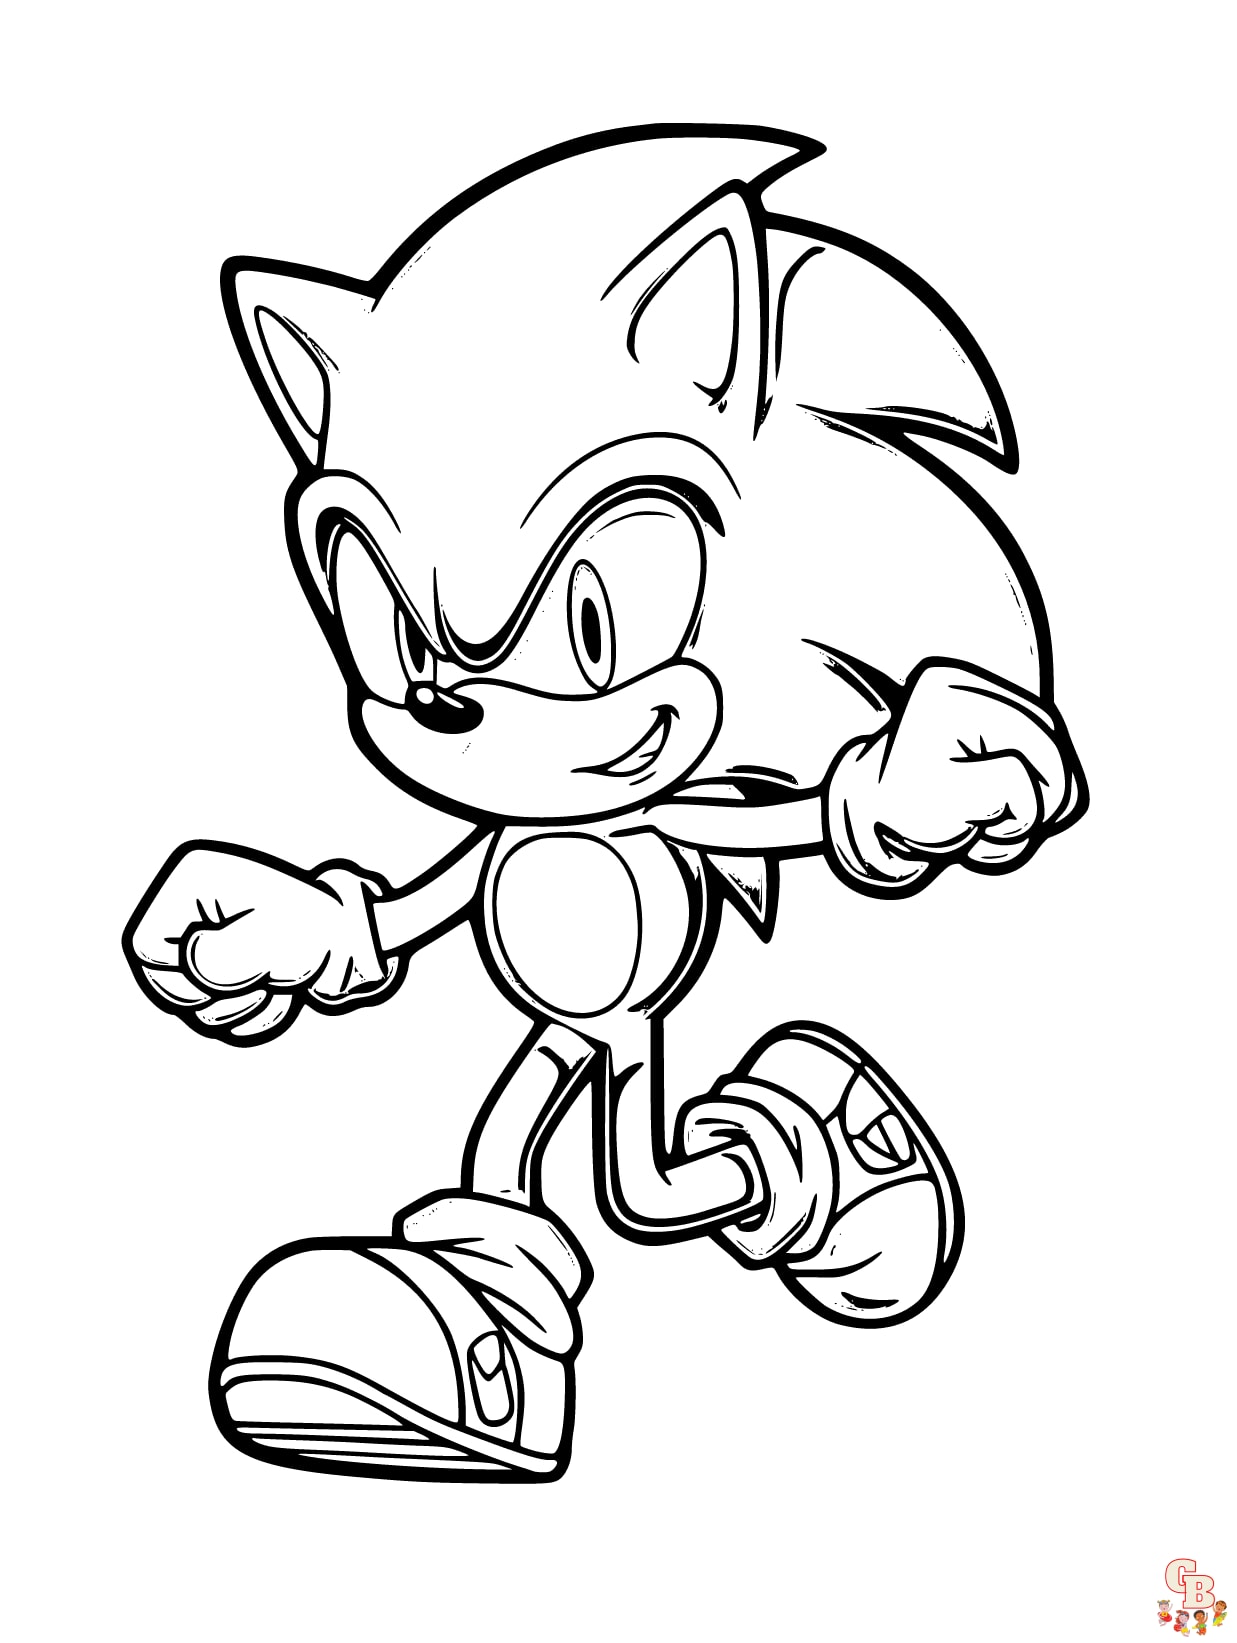 Unleash Your Creativity with Sonic Coloring Pages - GBcoloring | Art